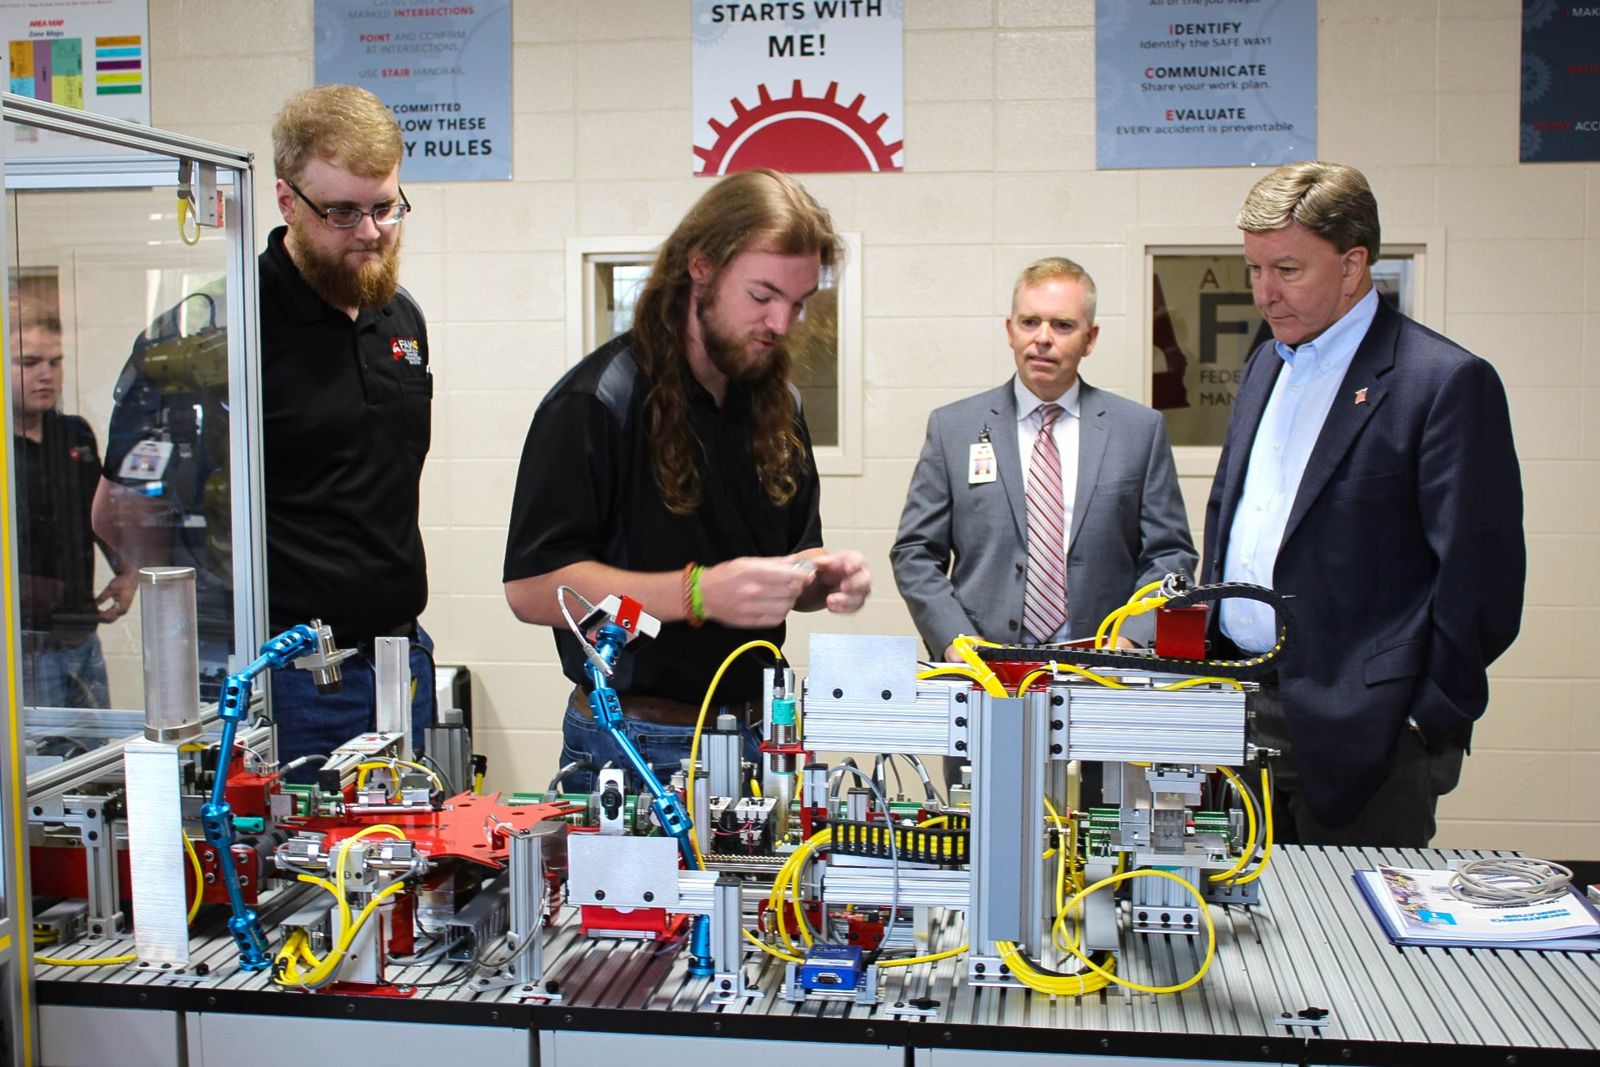 Congressman Mike Rogers takes a tour of the labs at the Advanced Manufacturing Center on the Ayers Campus of Gadsden State Community College. FAME senior students Luke Devin, left, and Wes Simmons explains how the mechantronics line works. They are joined by Alan Smith, second from right, dean of Workforce Development.